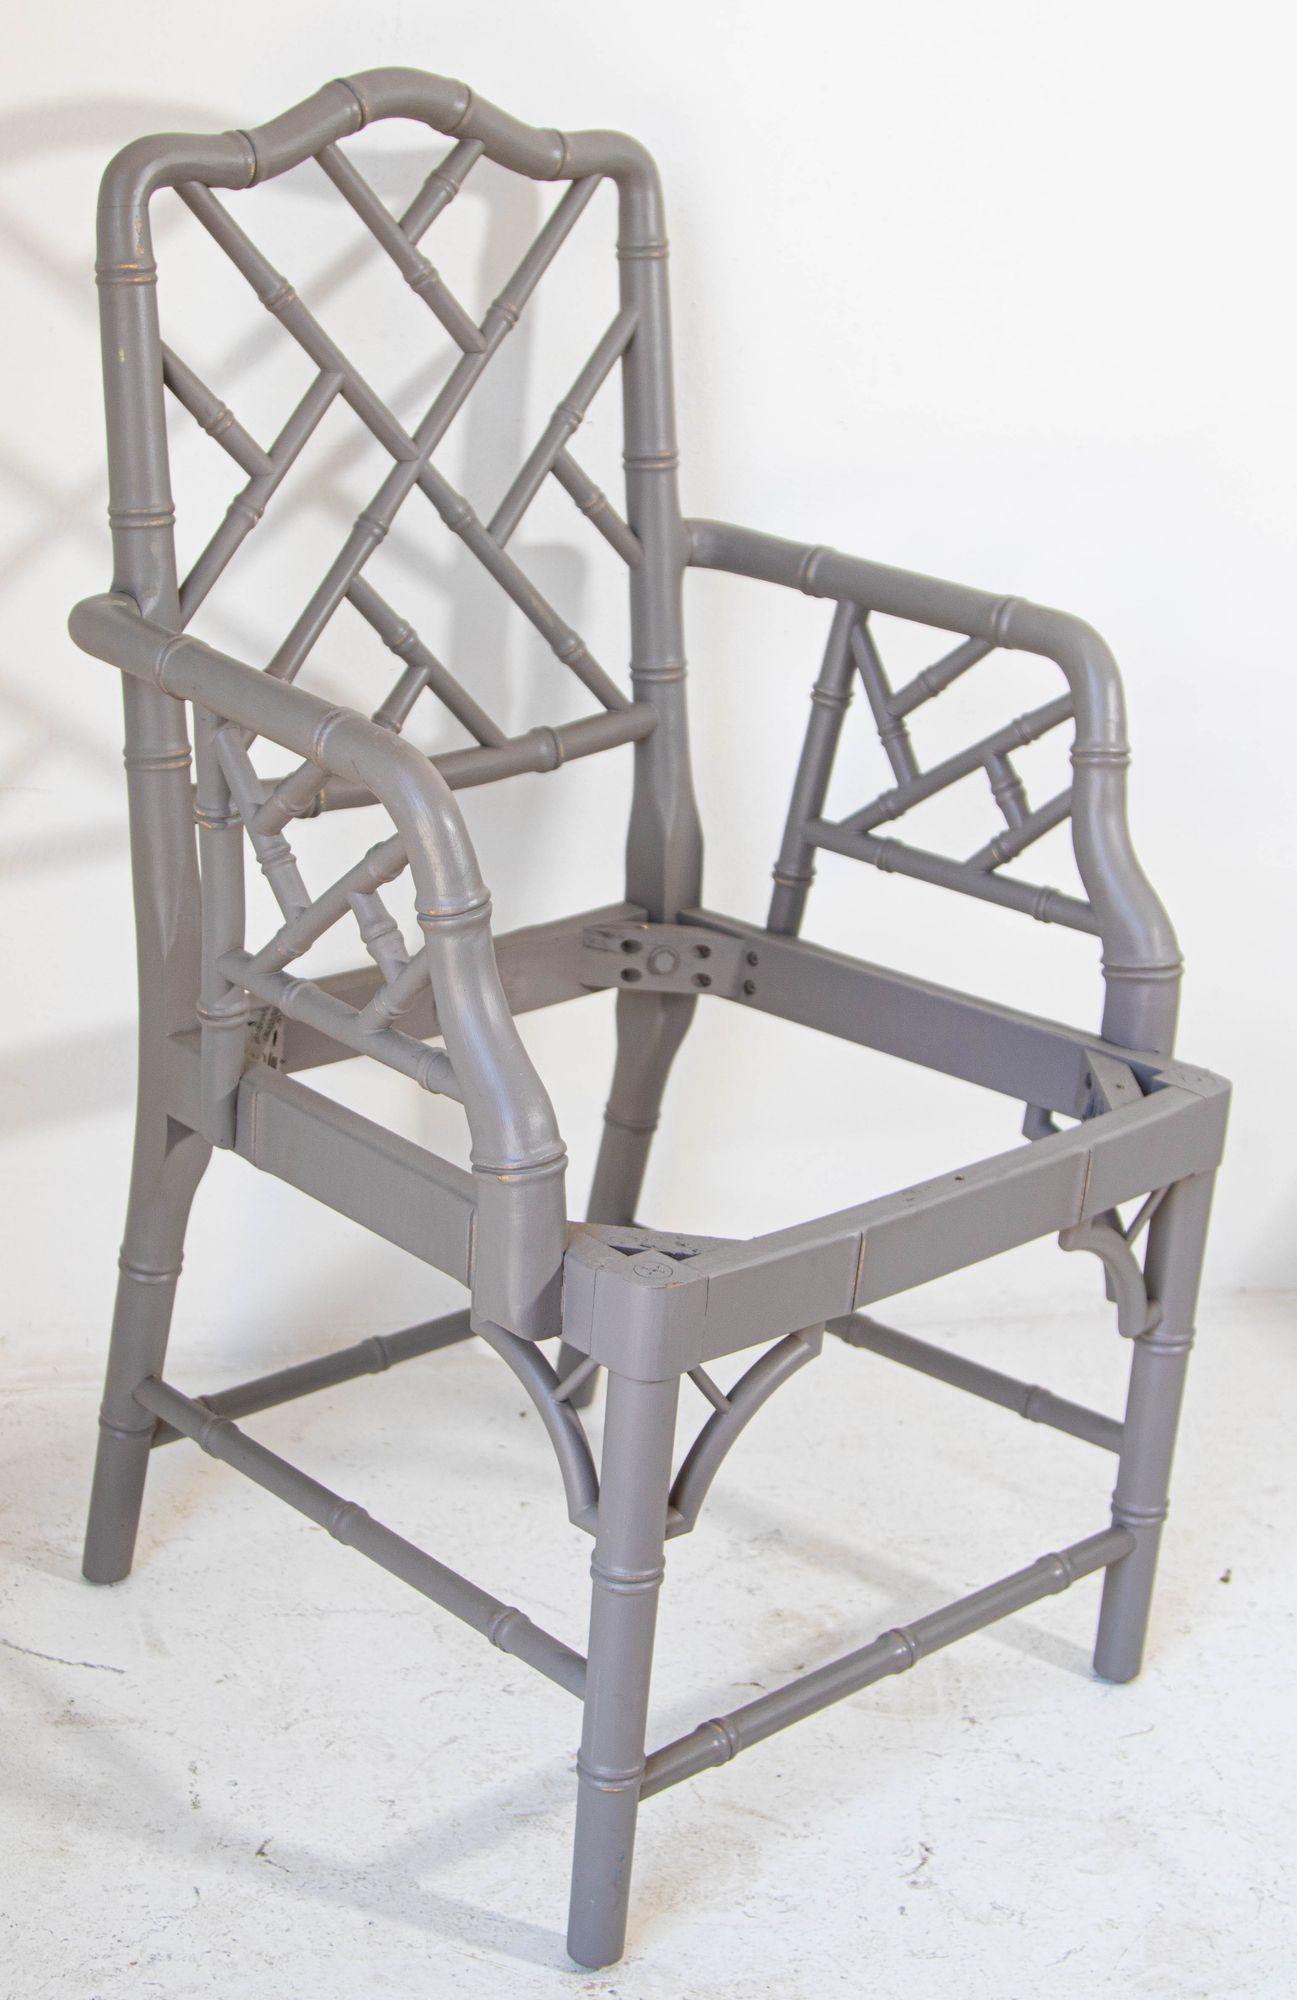 Chinese Chippendale Faux Bamboo Chairs Jonathan Adler Style Set of Four For Sale 3